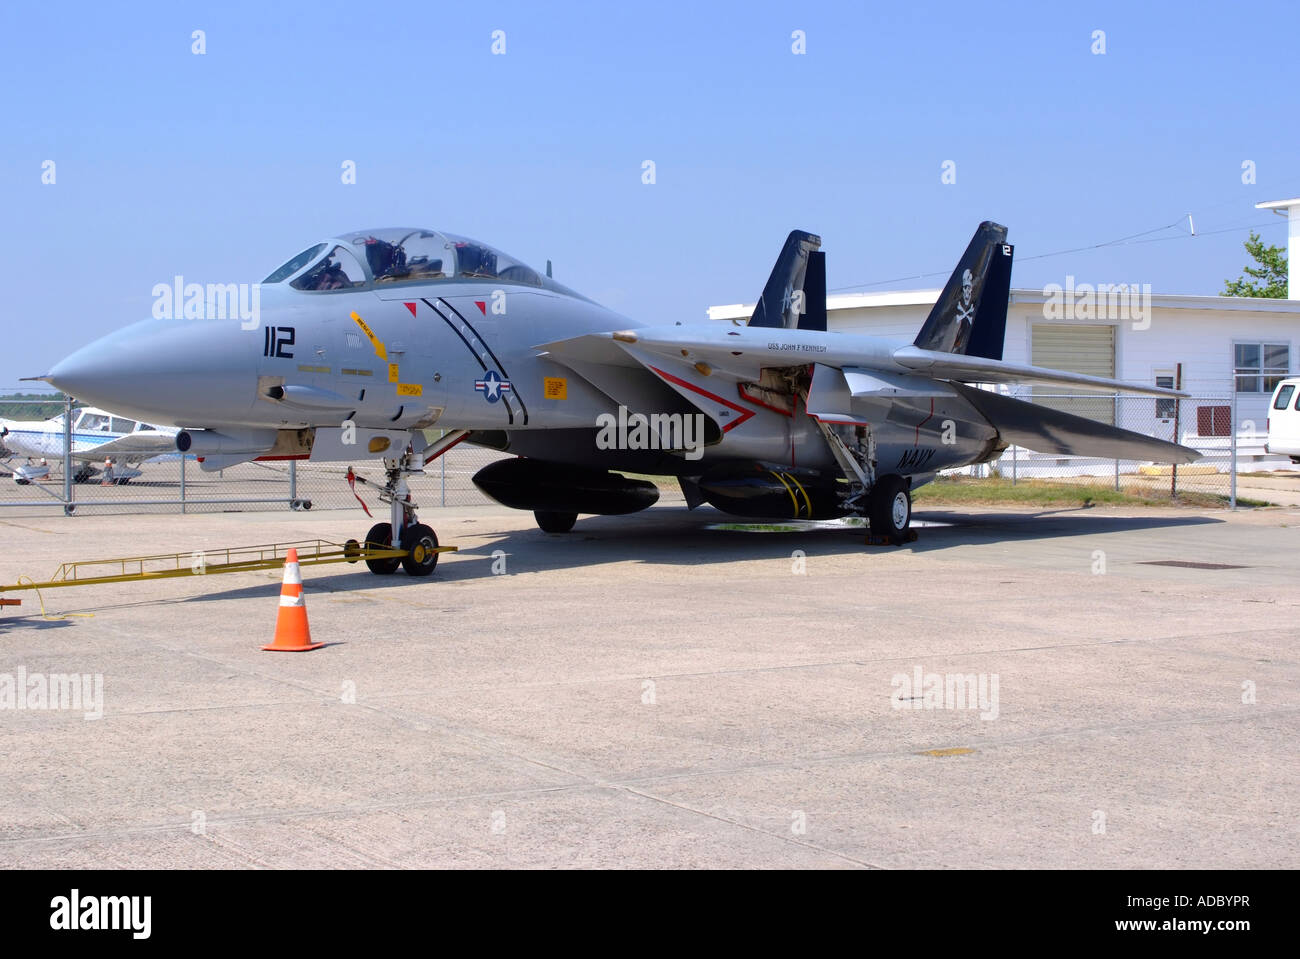 Grumman F-14 Tomcat Fighter Aircraft at Naval Air Station Wildwood Aviation Museum Cape May New Jersey United States America Stock Photo